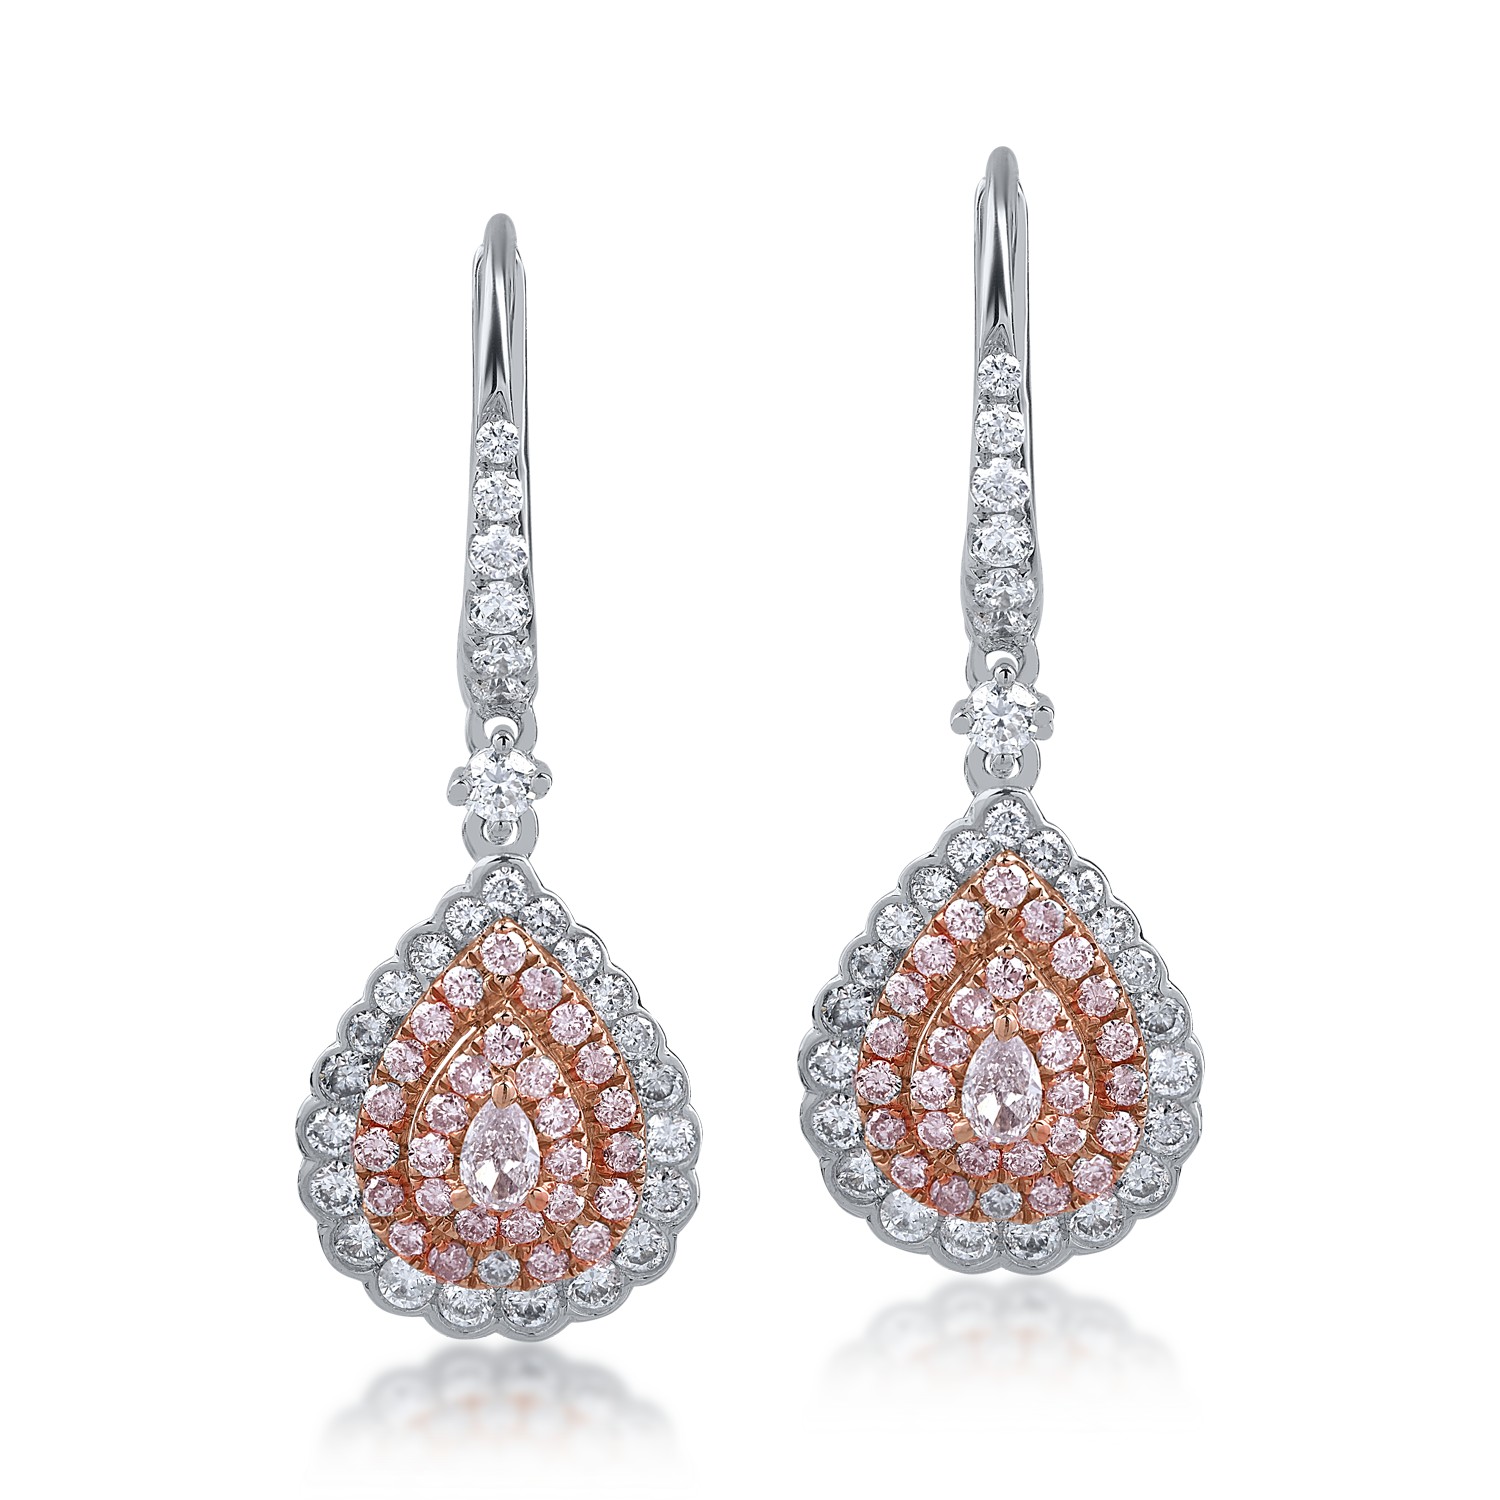 White-rose gold earrings with 0.74ct clear diamonds and 0.56ct rose diamonds